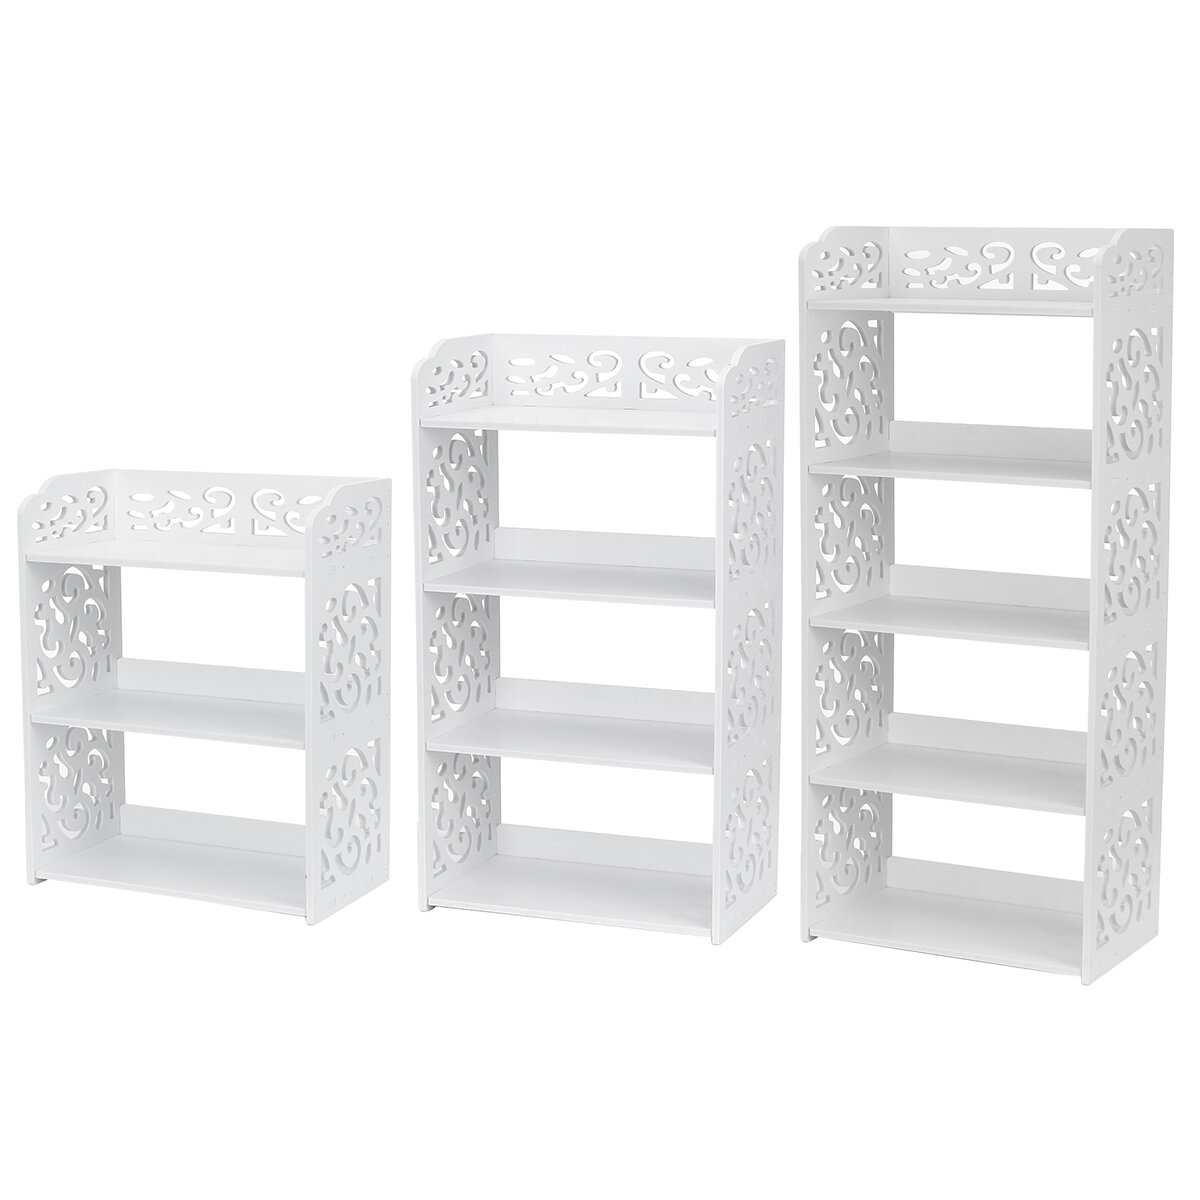 Image of 3/4/5 Tiers Shoes Rack Display Stands White Storage Shelf Organiser Unit Cabinet